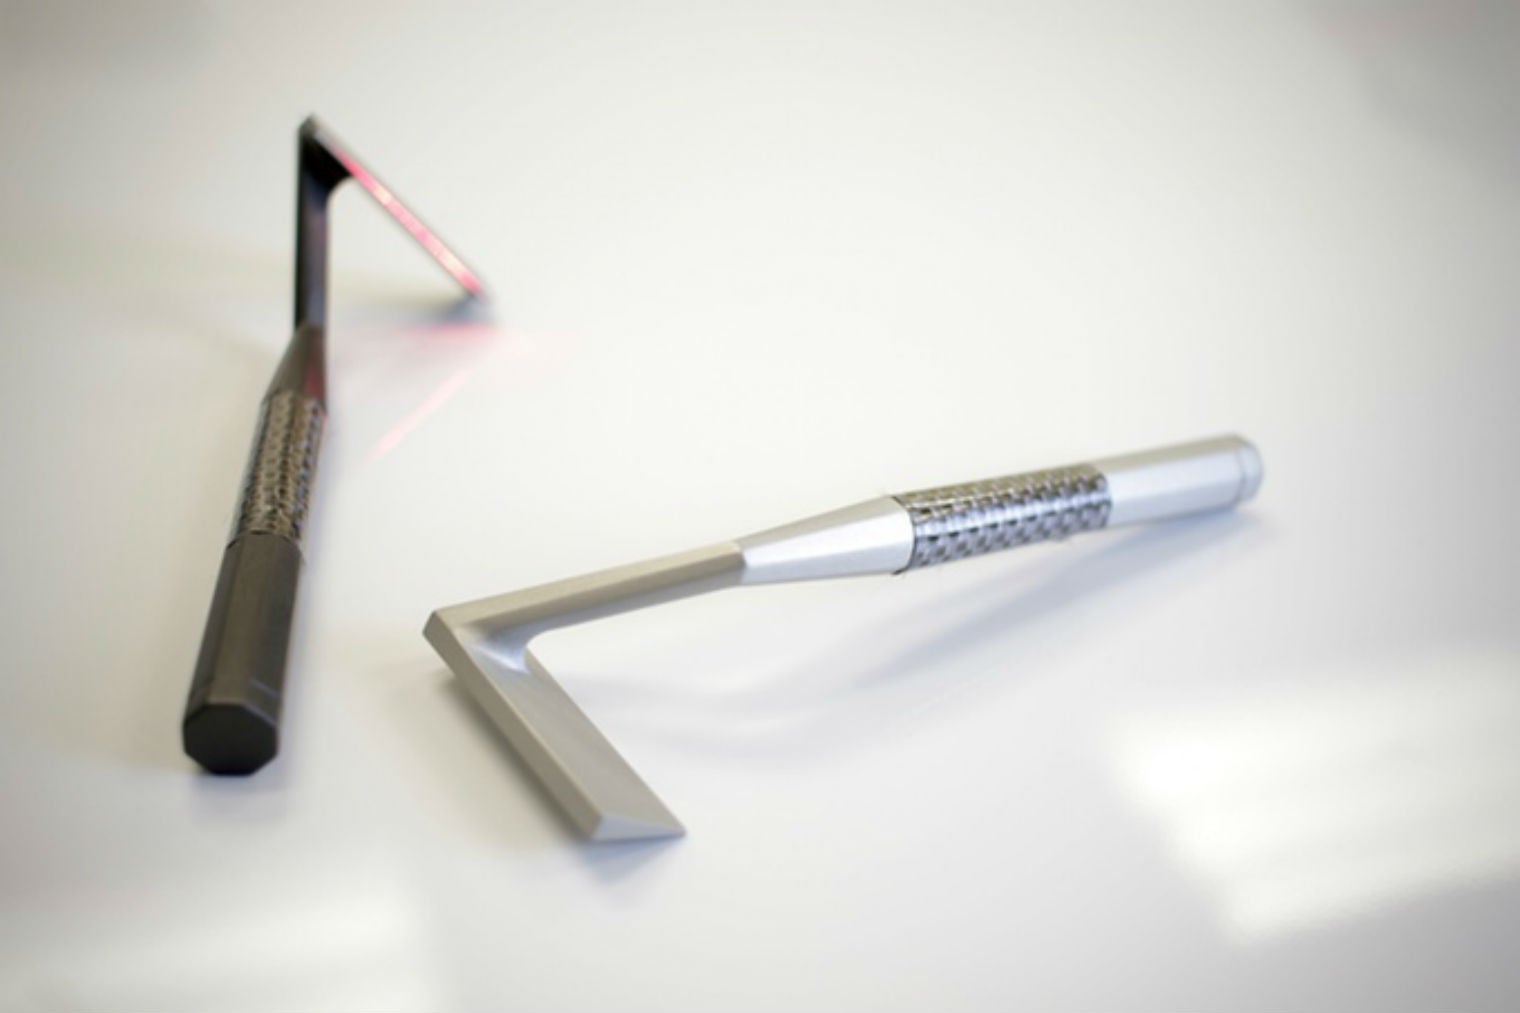 The team behind the razor said it would use laser light to cut through hairs